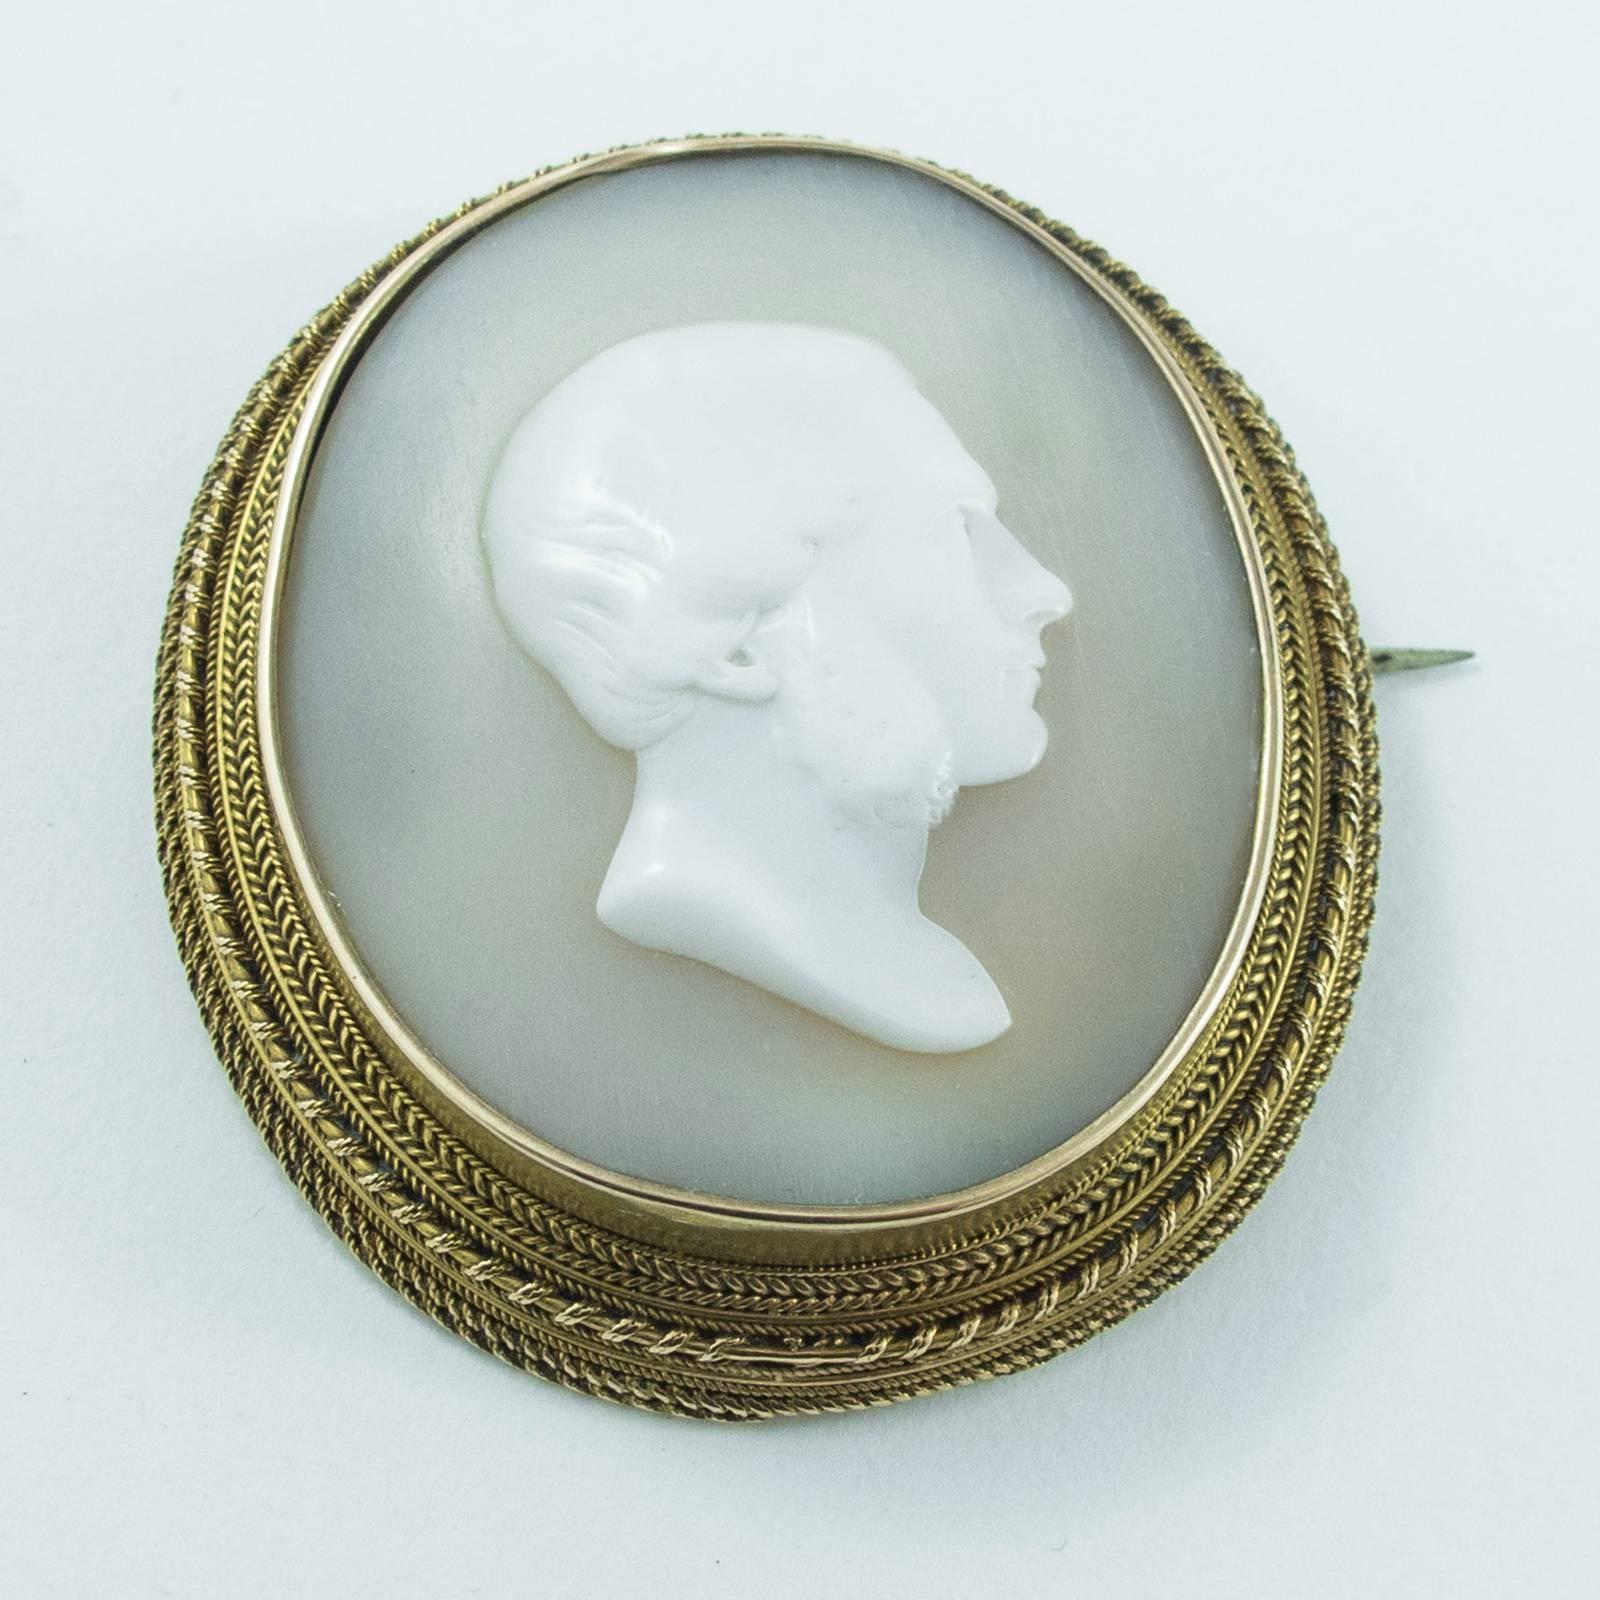 A simple and beautifully rendered cameo portrays a male in profile mounted in a hand crafted elegant 18K red gold frame.

The shell itself is unusual in that the ground is semi translucent and appears as a soft dove grey - a gorgeous juxtaposition